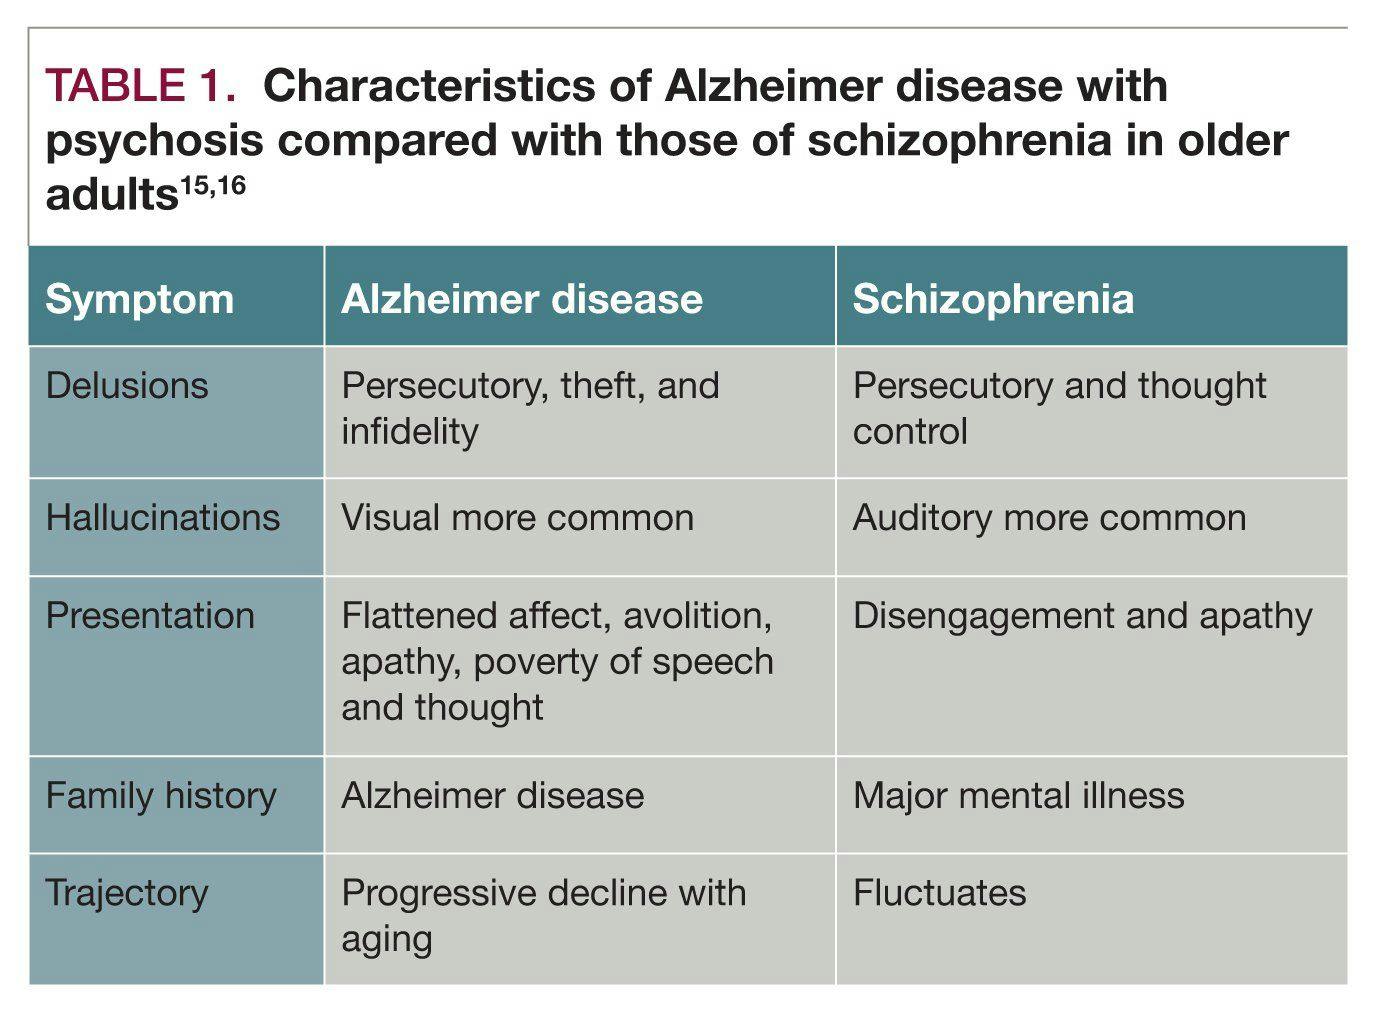 Characteristics of Alzheimer disease with psychosis compared with those of schizophrenia in older adults